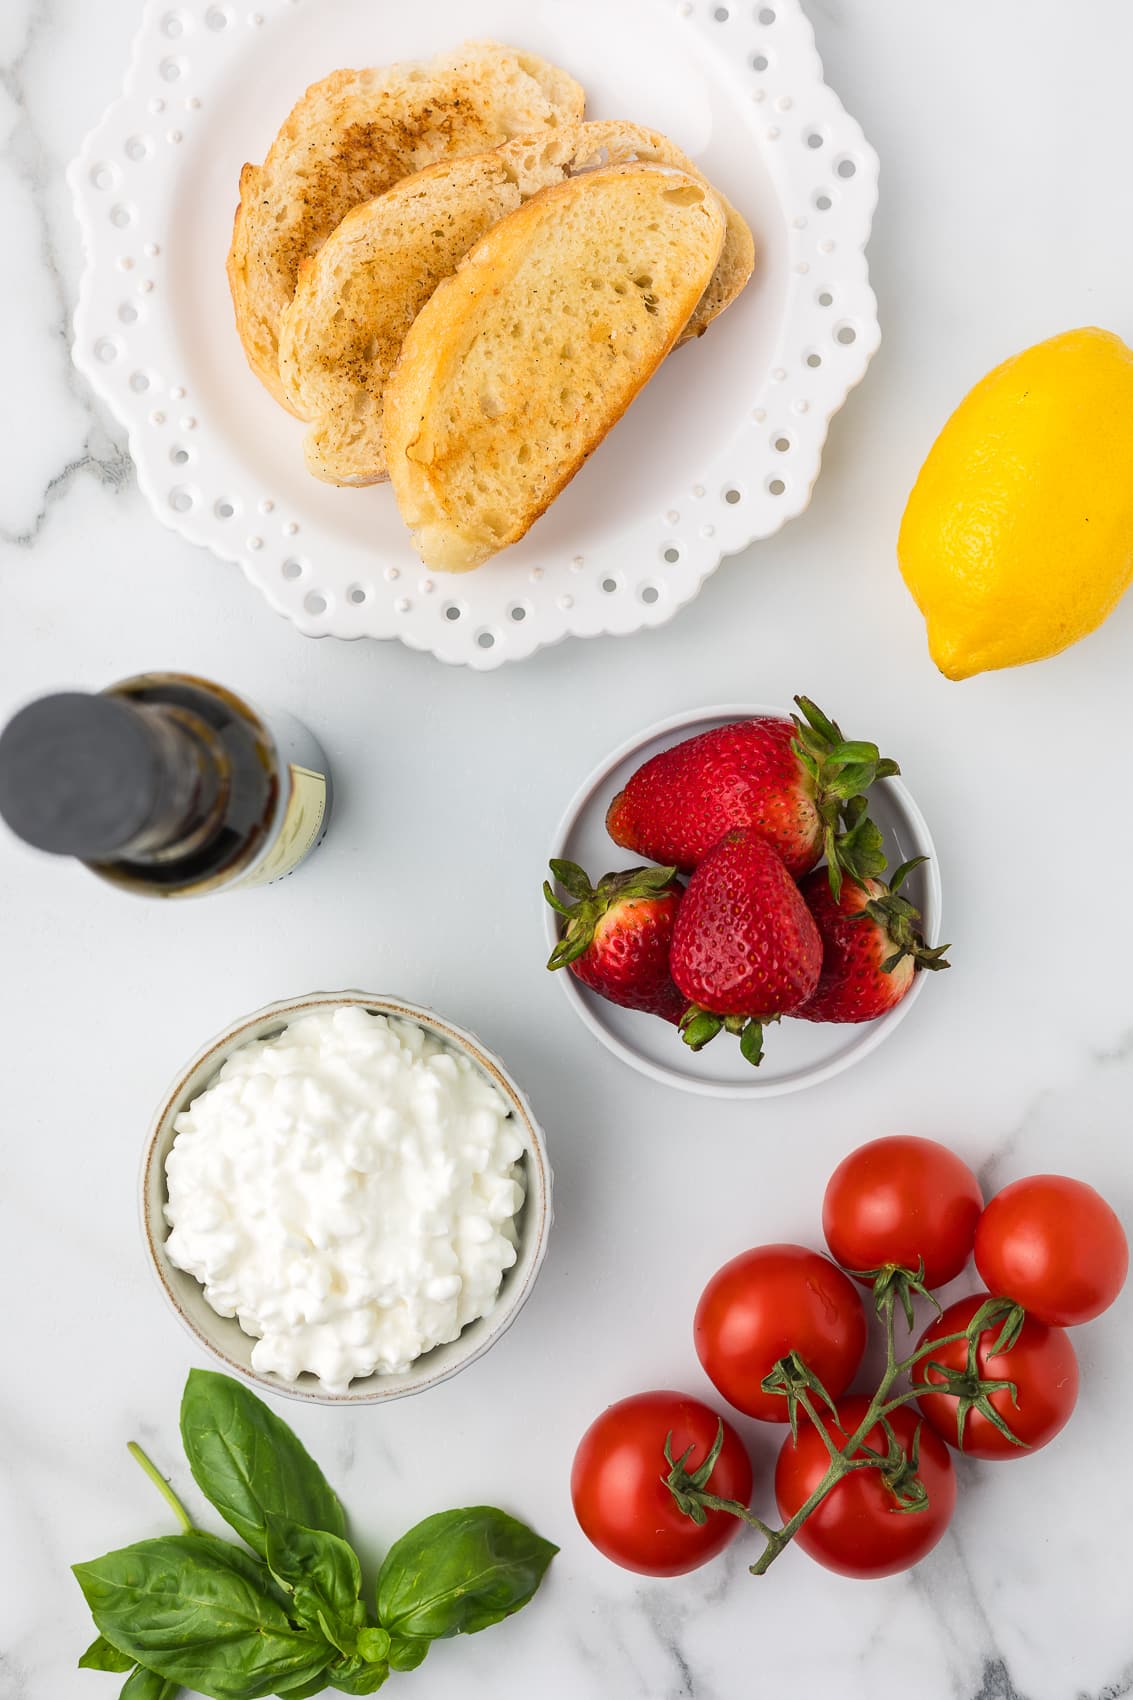 Ingredients to make cottage cheese toast with tomatoes and strawberries.